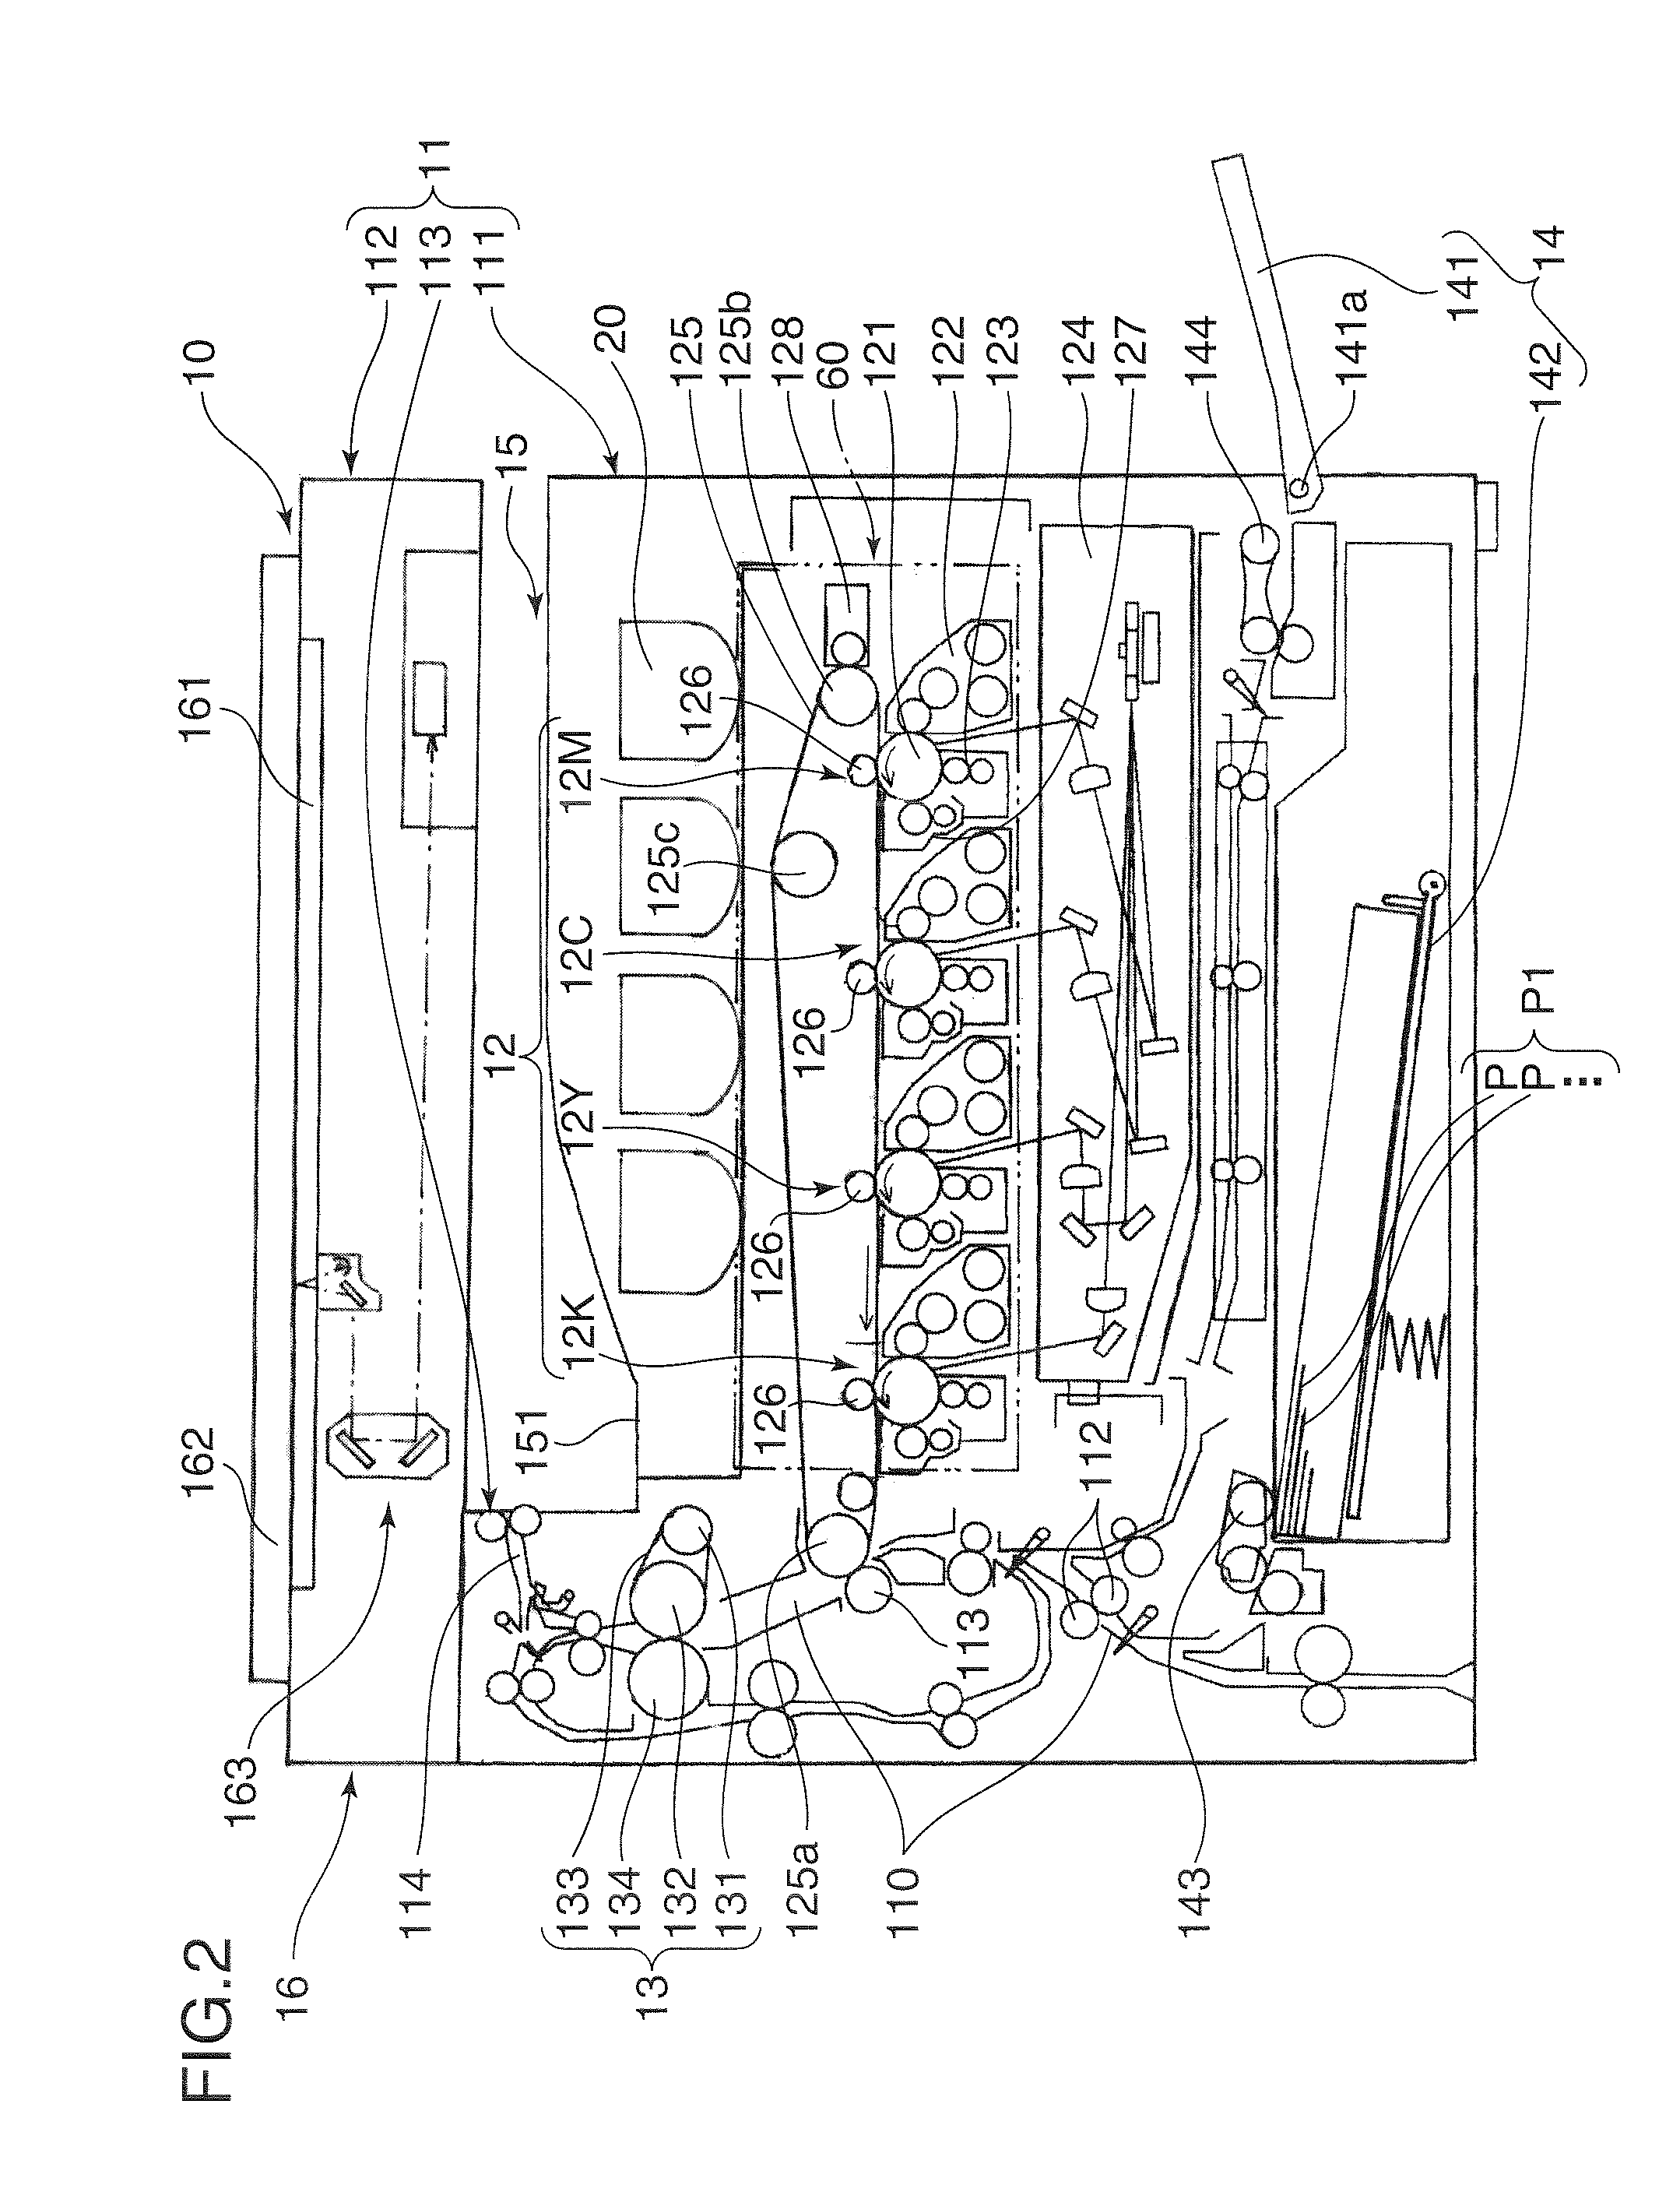 Toner cartridge and image forming apparatus including the toner cartridge